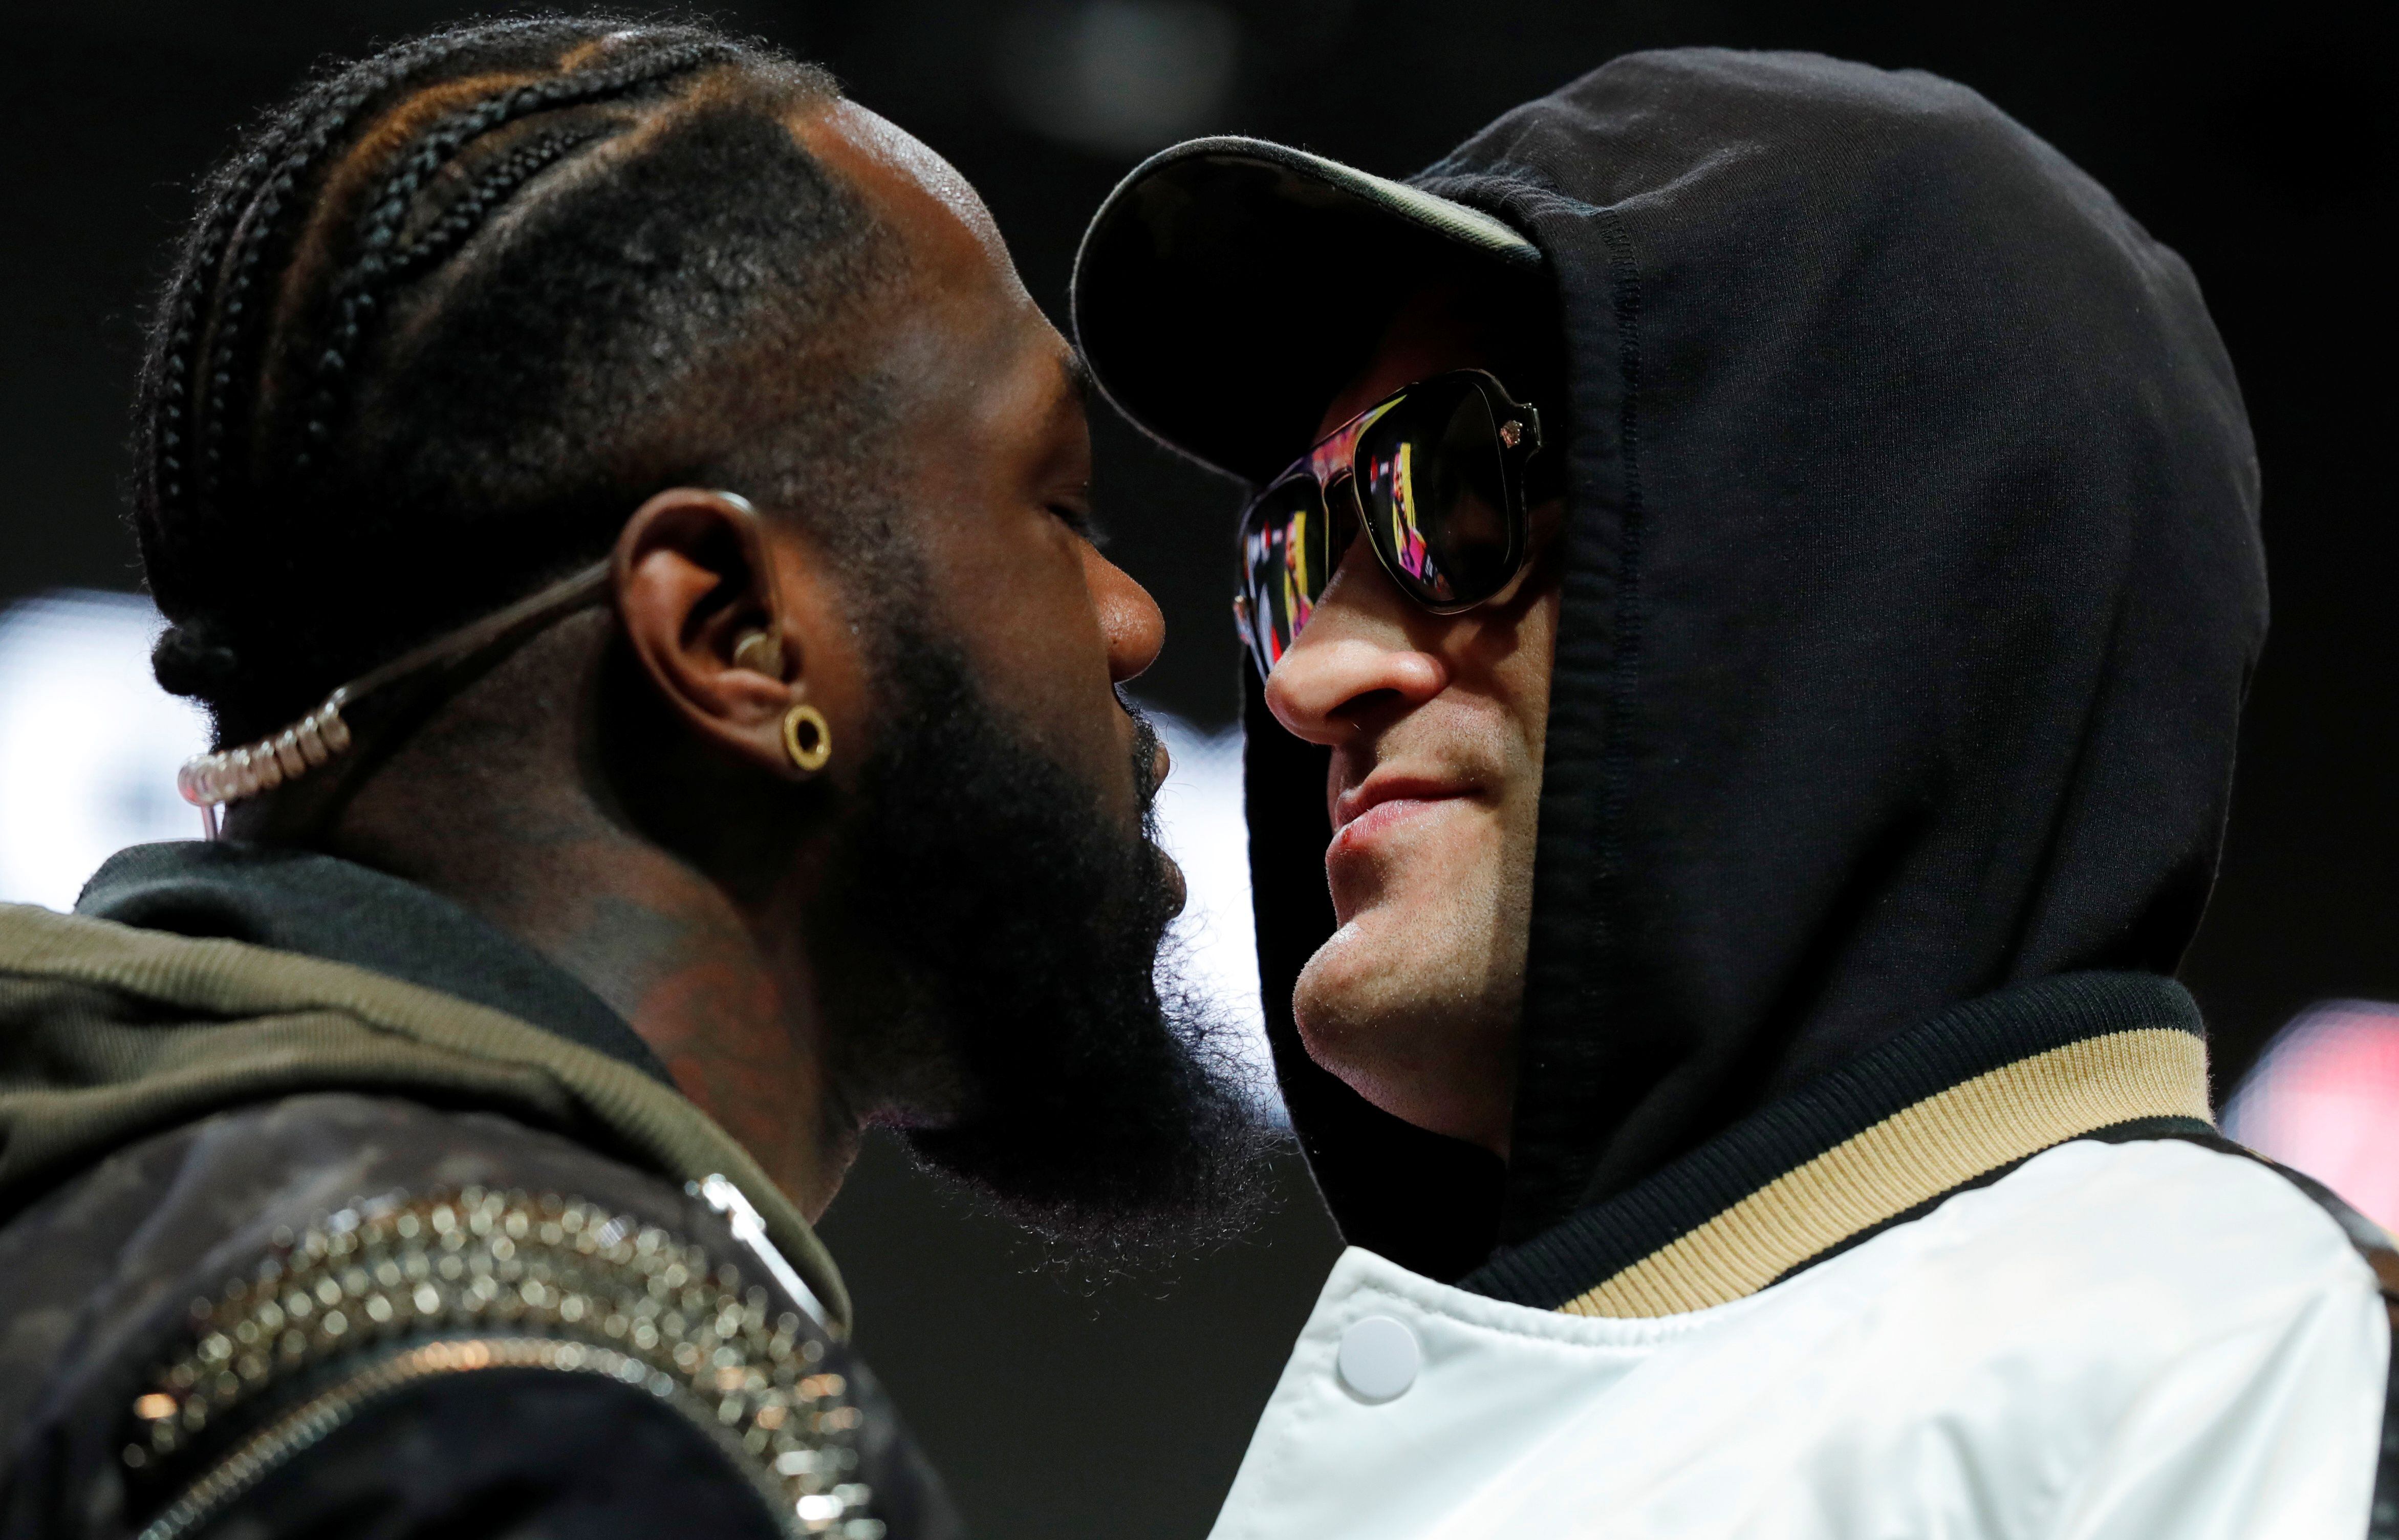 Boxing - Deontay Wilder & Tyson Fury Press Conference - The Grand Garden Arena at MGM Grand, Las Vegas, United States - February 19, 2020  Tyson Fury and Deontay Wilder go head to head during the press conference  REUTERS/Steve Marcus